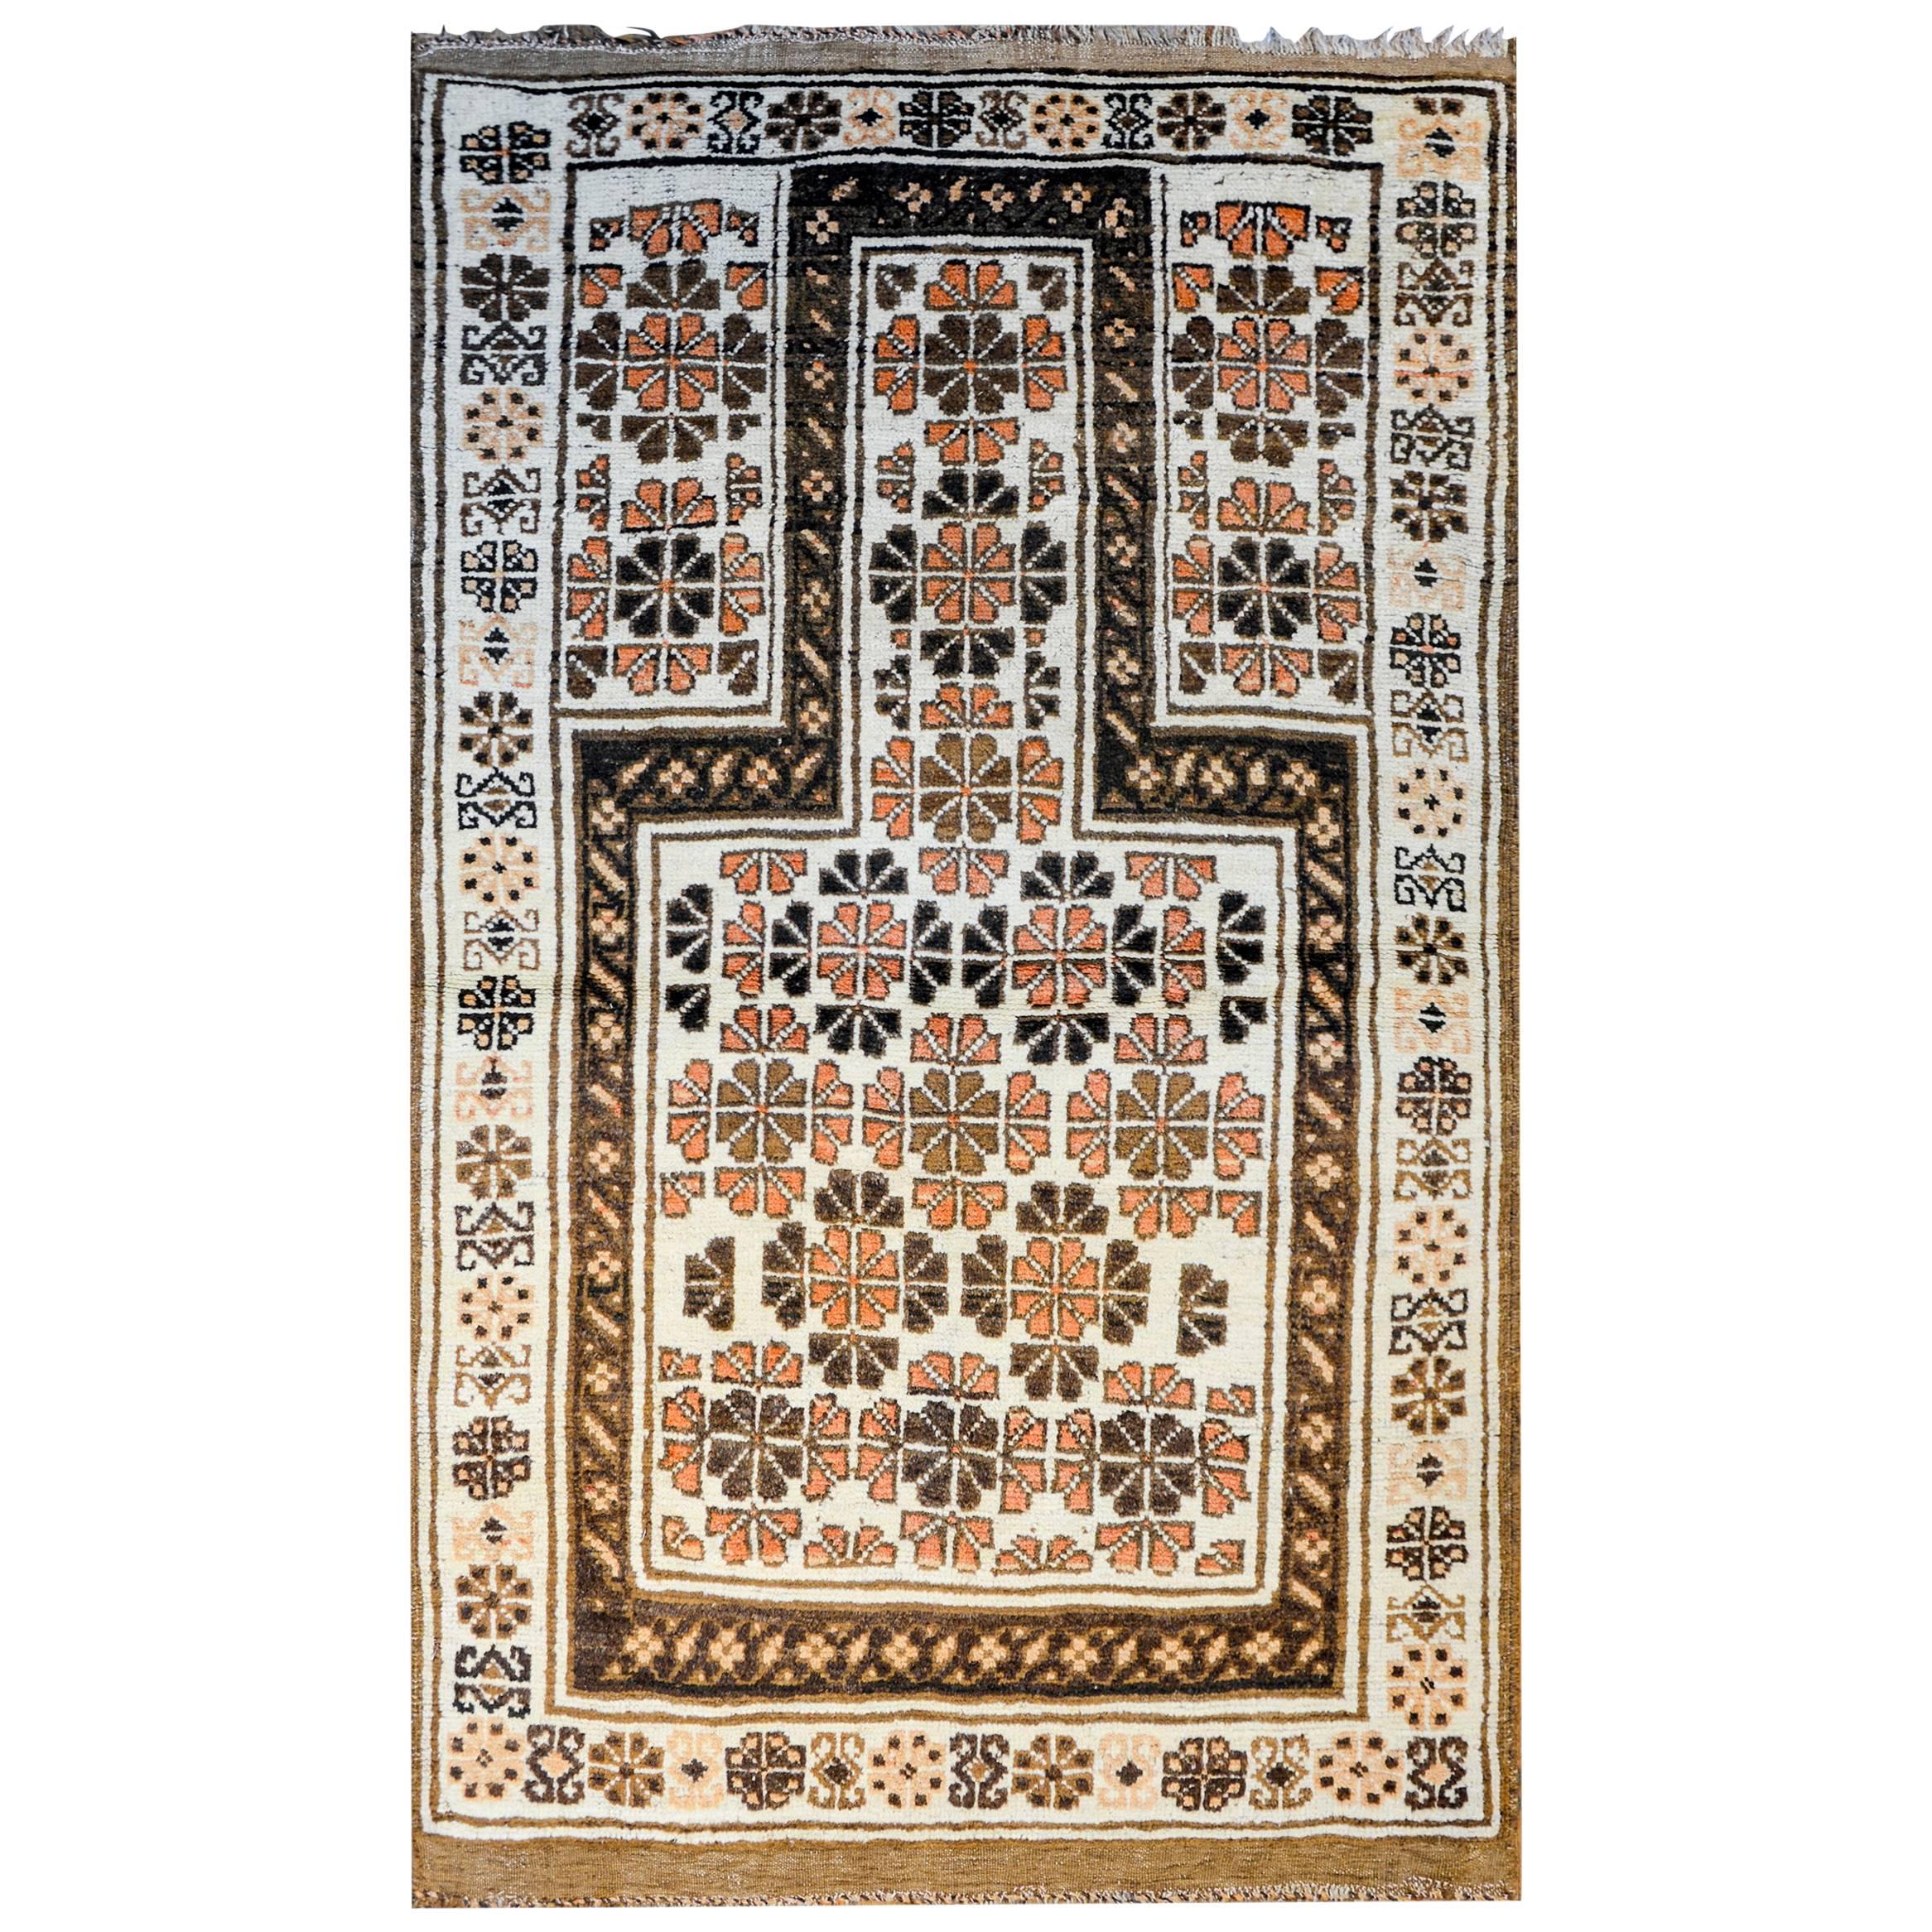 Early 20th Century Baluch Prayer Rug For Sale